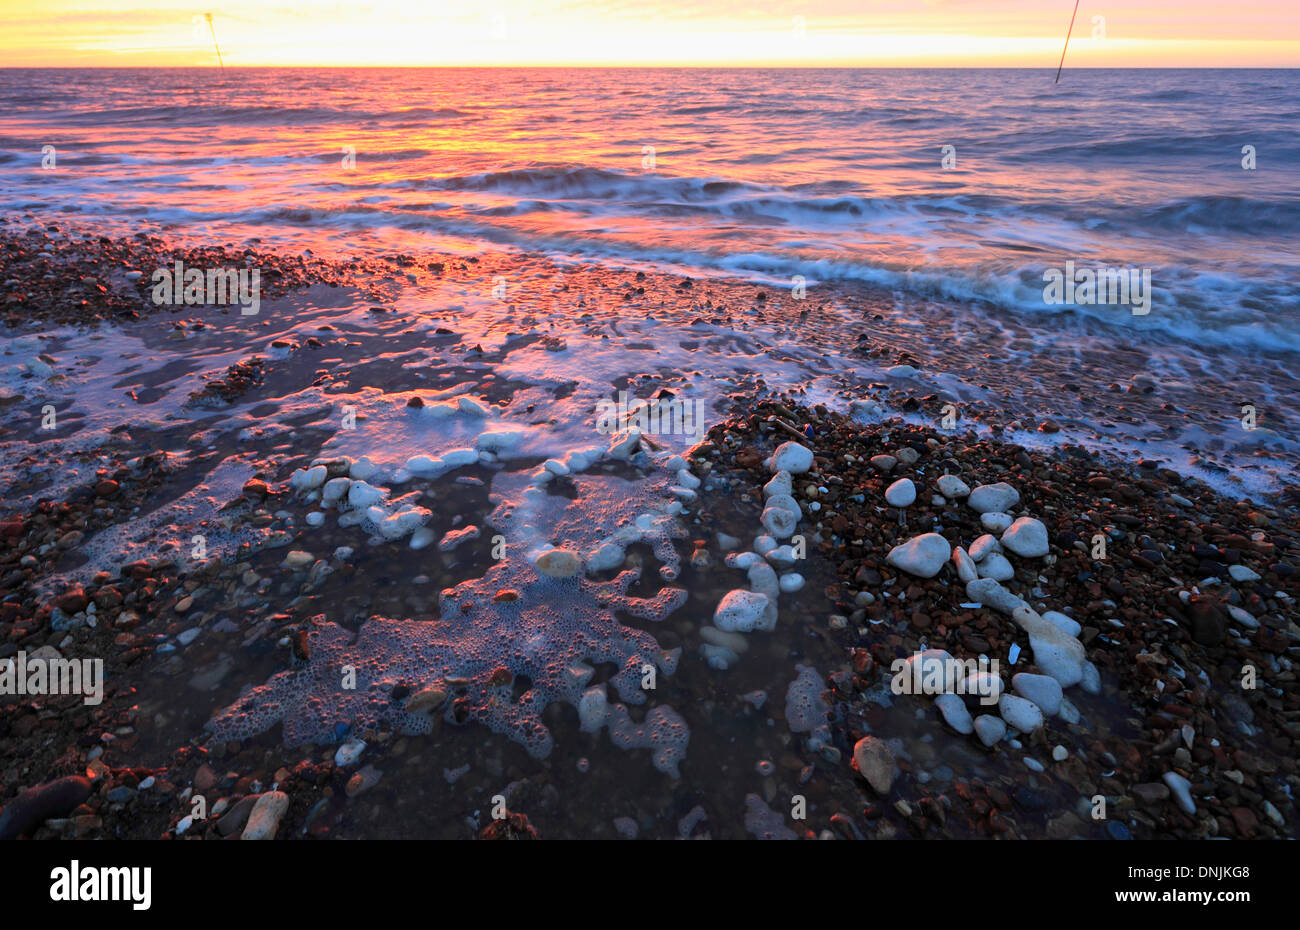 The sun set on New Year's Eve 2013 at Heacham, Norfolk, with '2013' spelt out in white stones. Stock Photo